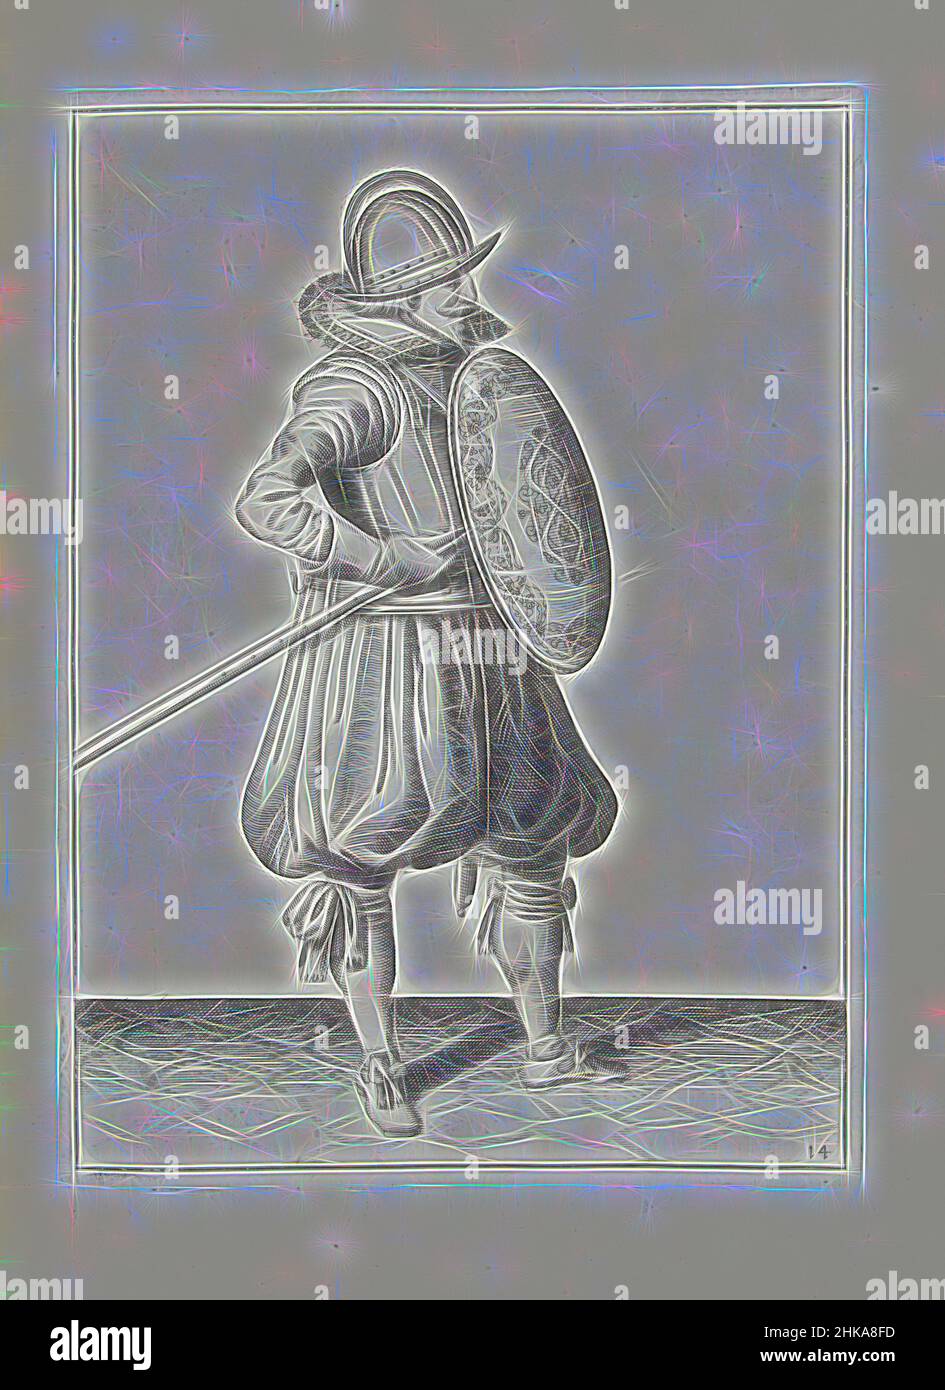 Inspired by The exercise with shield and spear: the soldier at two times brings the spear into position to drag, second movement (no. 14), 1618, De Nassausche Wapen-Handelinge, van Schilt, Spies, Rappier ende Targe : beyde figuerlick afgebeelt, ende gestelt na de nieuwe ordening [of, Adam van Breen, Reimagined by Artotop. Classic art reinvented with a modern twist. Design of warm cheerful glowing of brightness and light ray radiance. Photography inspired by surrealism and futurism, embracing dynamic energy of modern technology, movement, speed and revolutionize culture Stock Photo